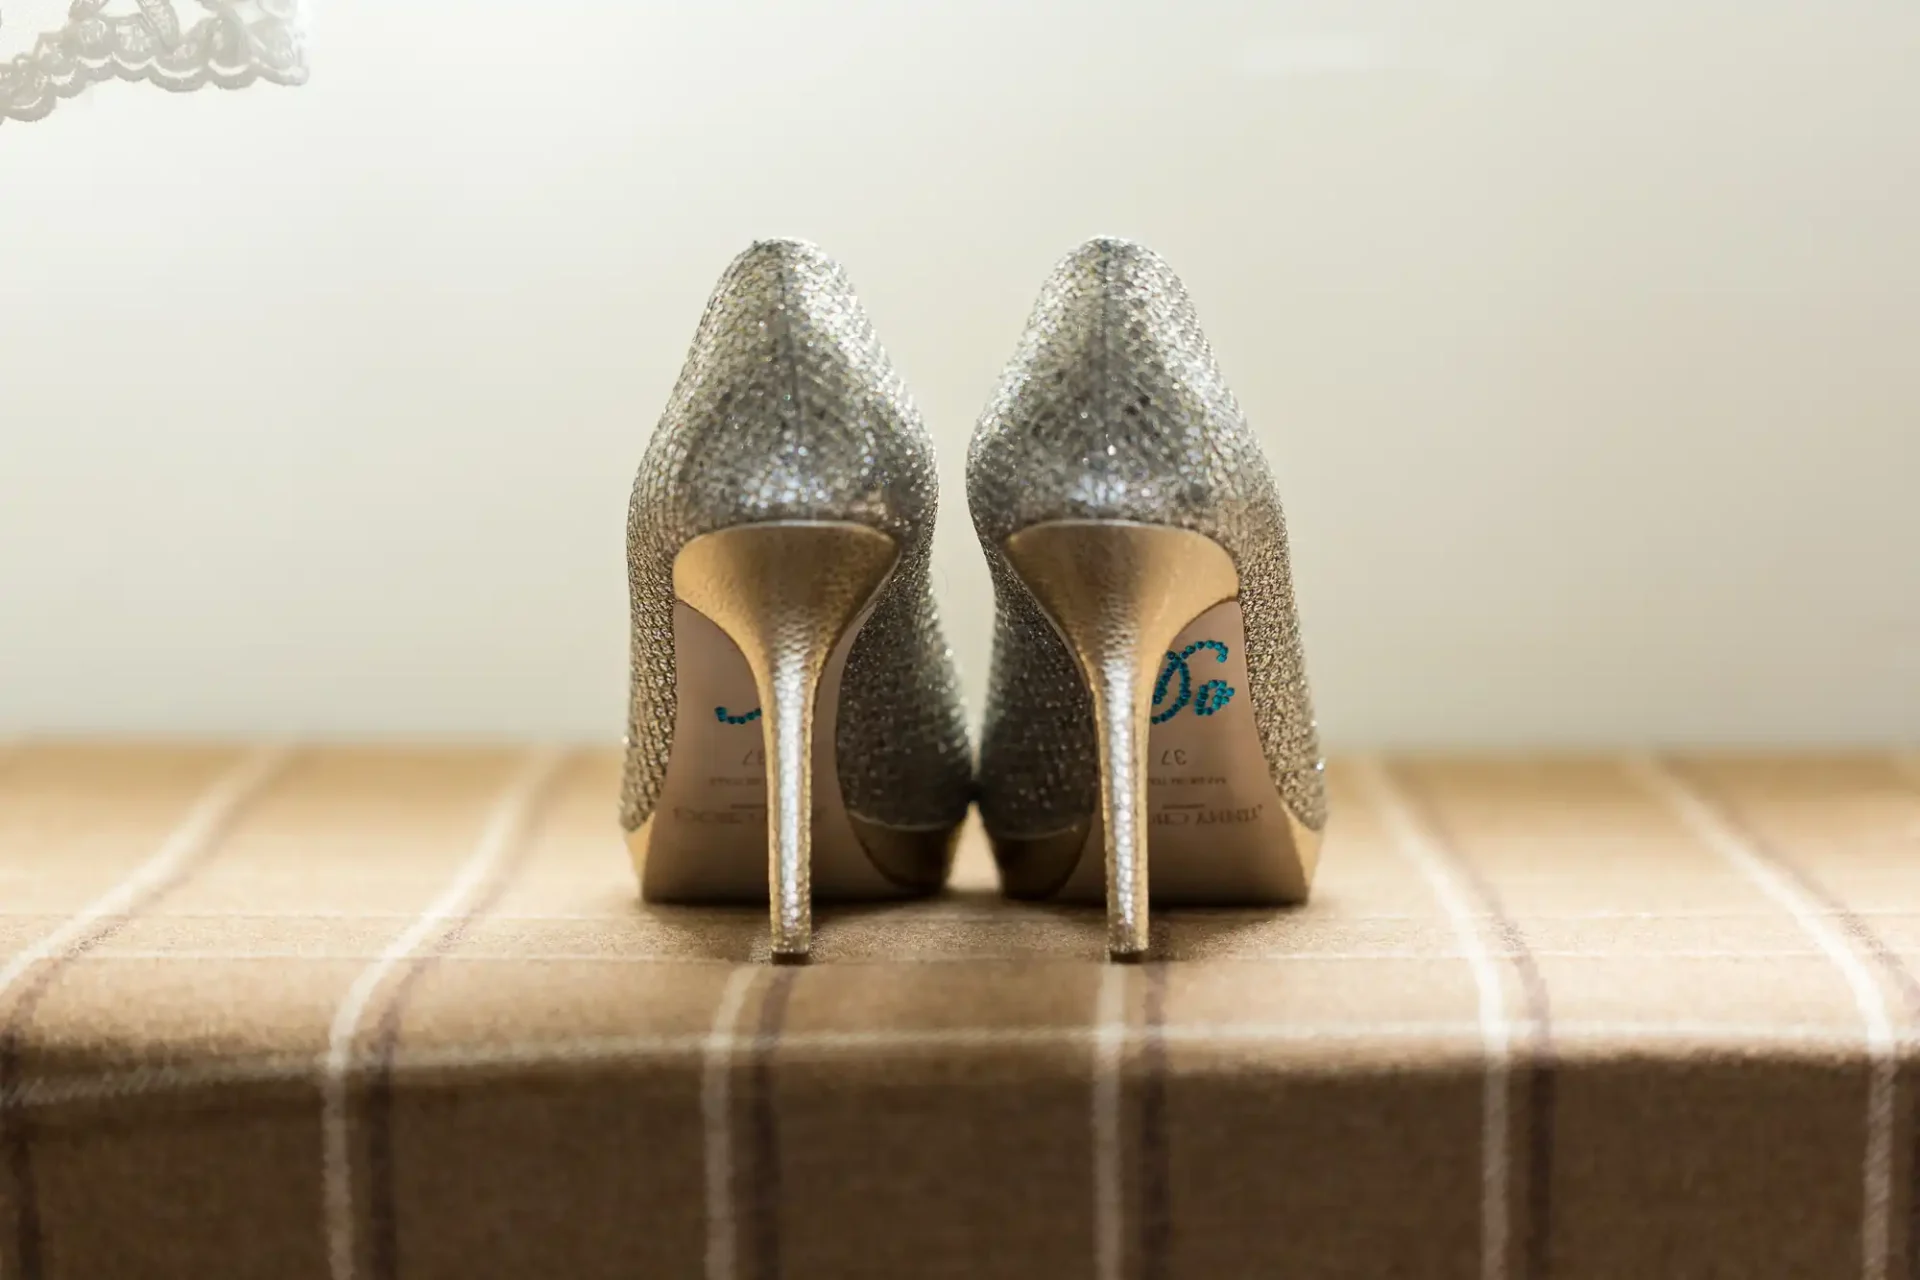 A pair of sparkly, silver high-heeled shoes placed back-to-back on a textured surface, with a soft, blurred background.